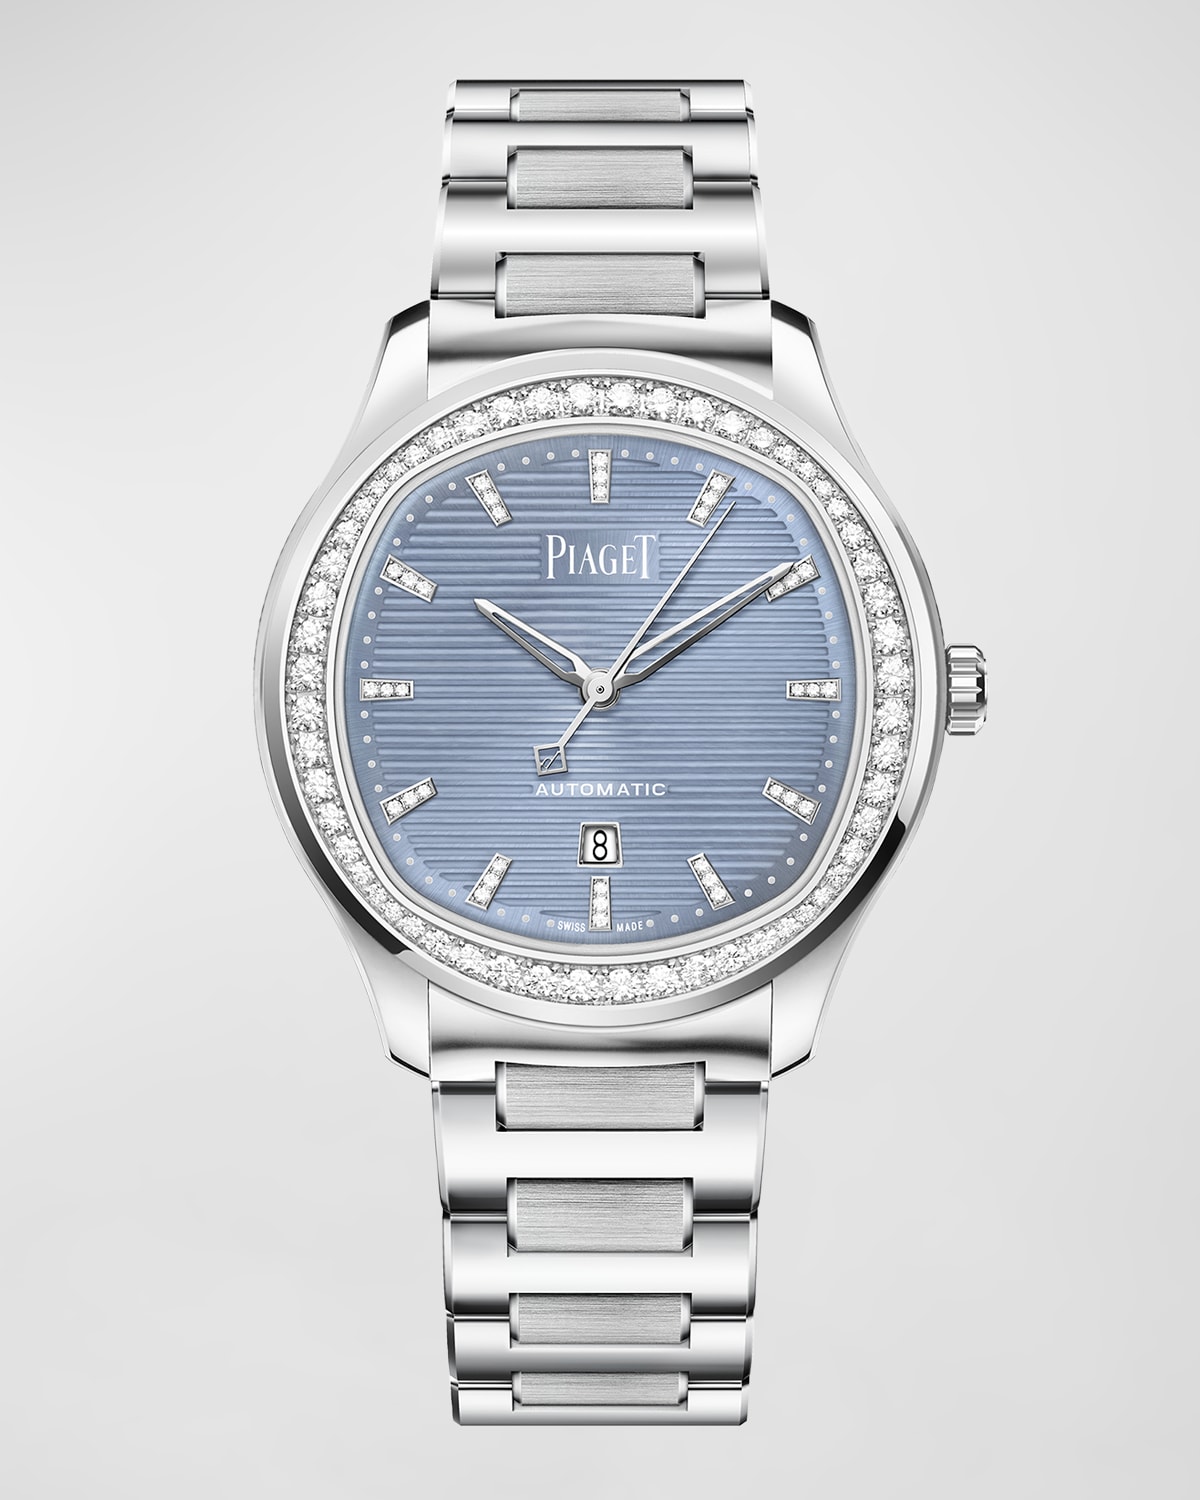 PIAGET POLO DATE 36MM LUXURY STAINLESS STEEL WATCH